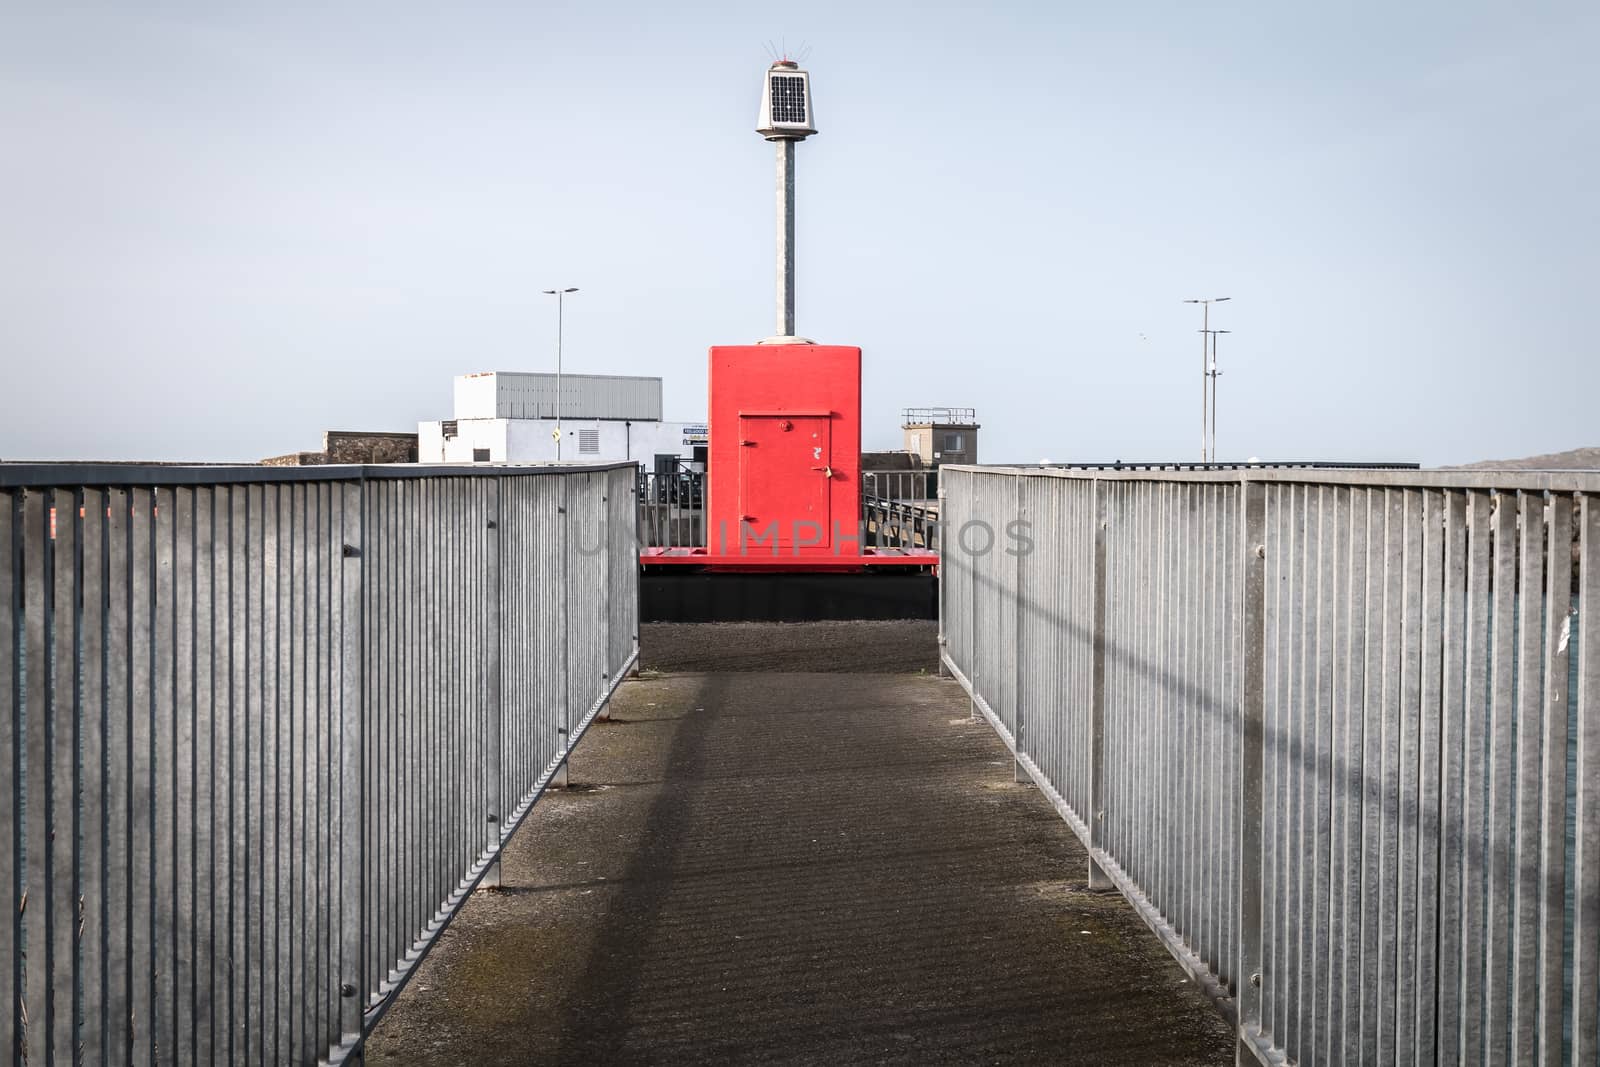 Howth near Dublin, Ireland - February 15, 2019: Illuminated signal for boat guidance at the entrance to Howth harbor on a winter day